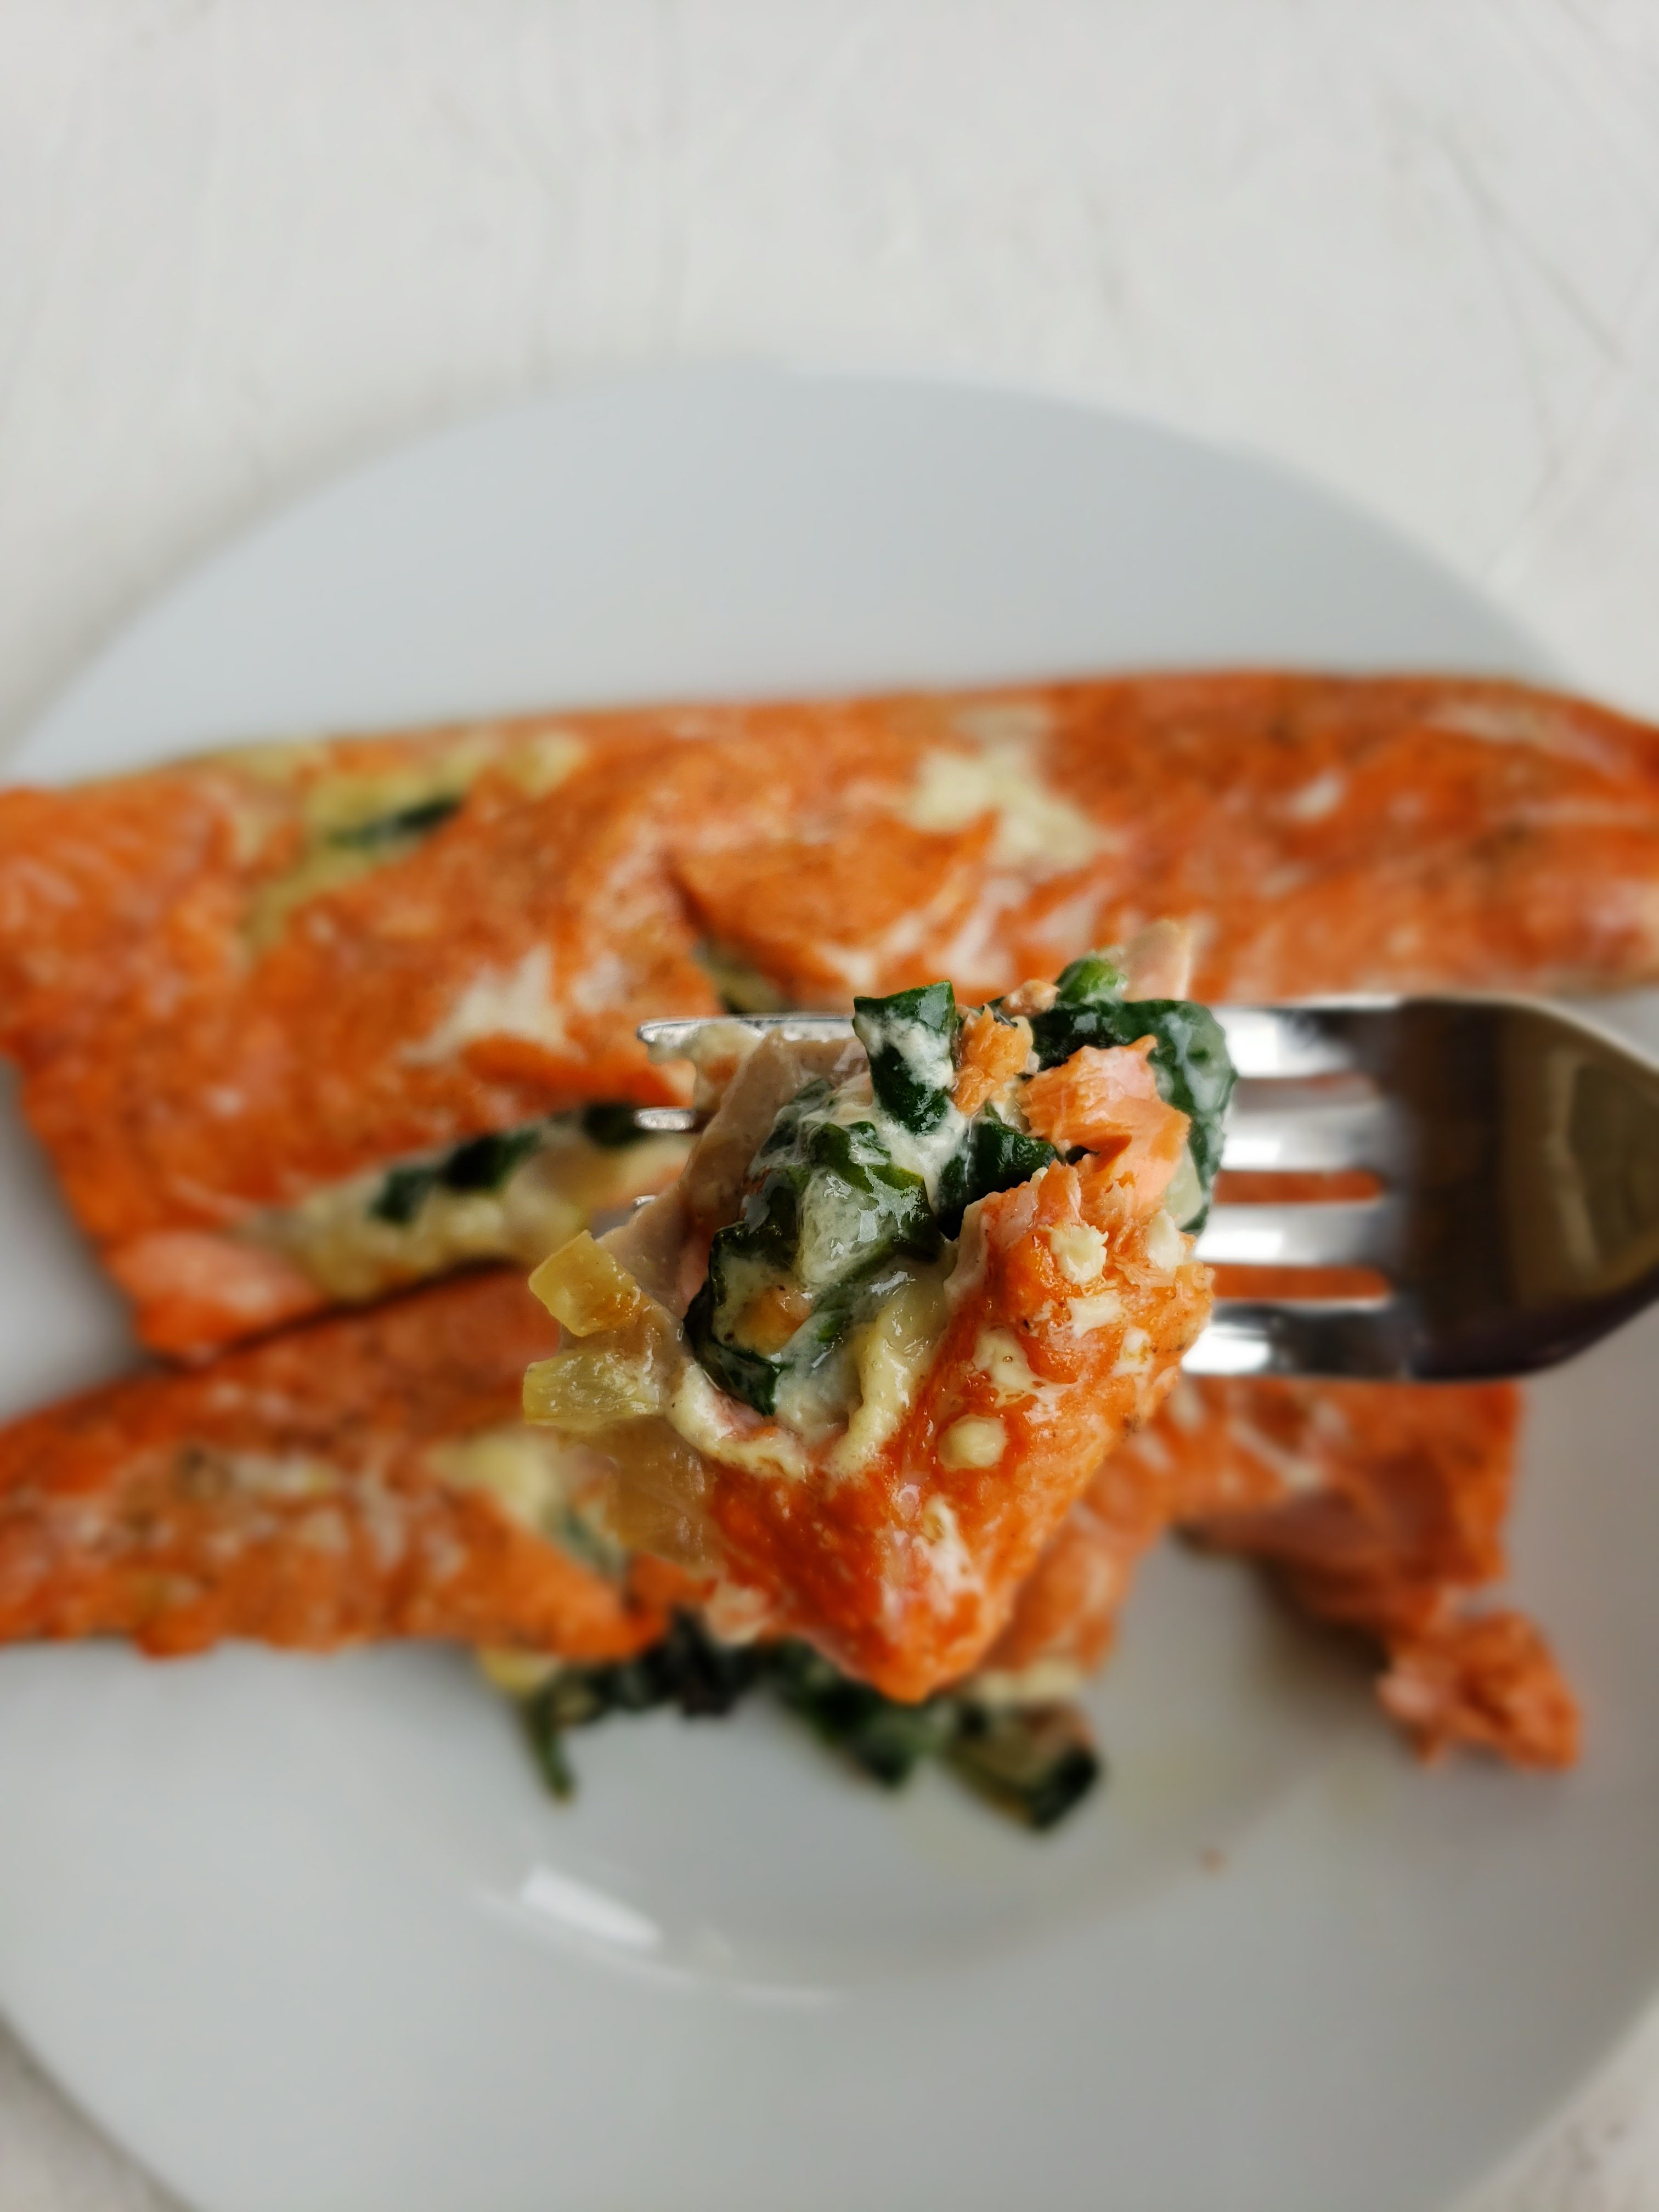 Creamy Spinach Stuffed Salmon | Whole30 - The Whole Crowe